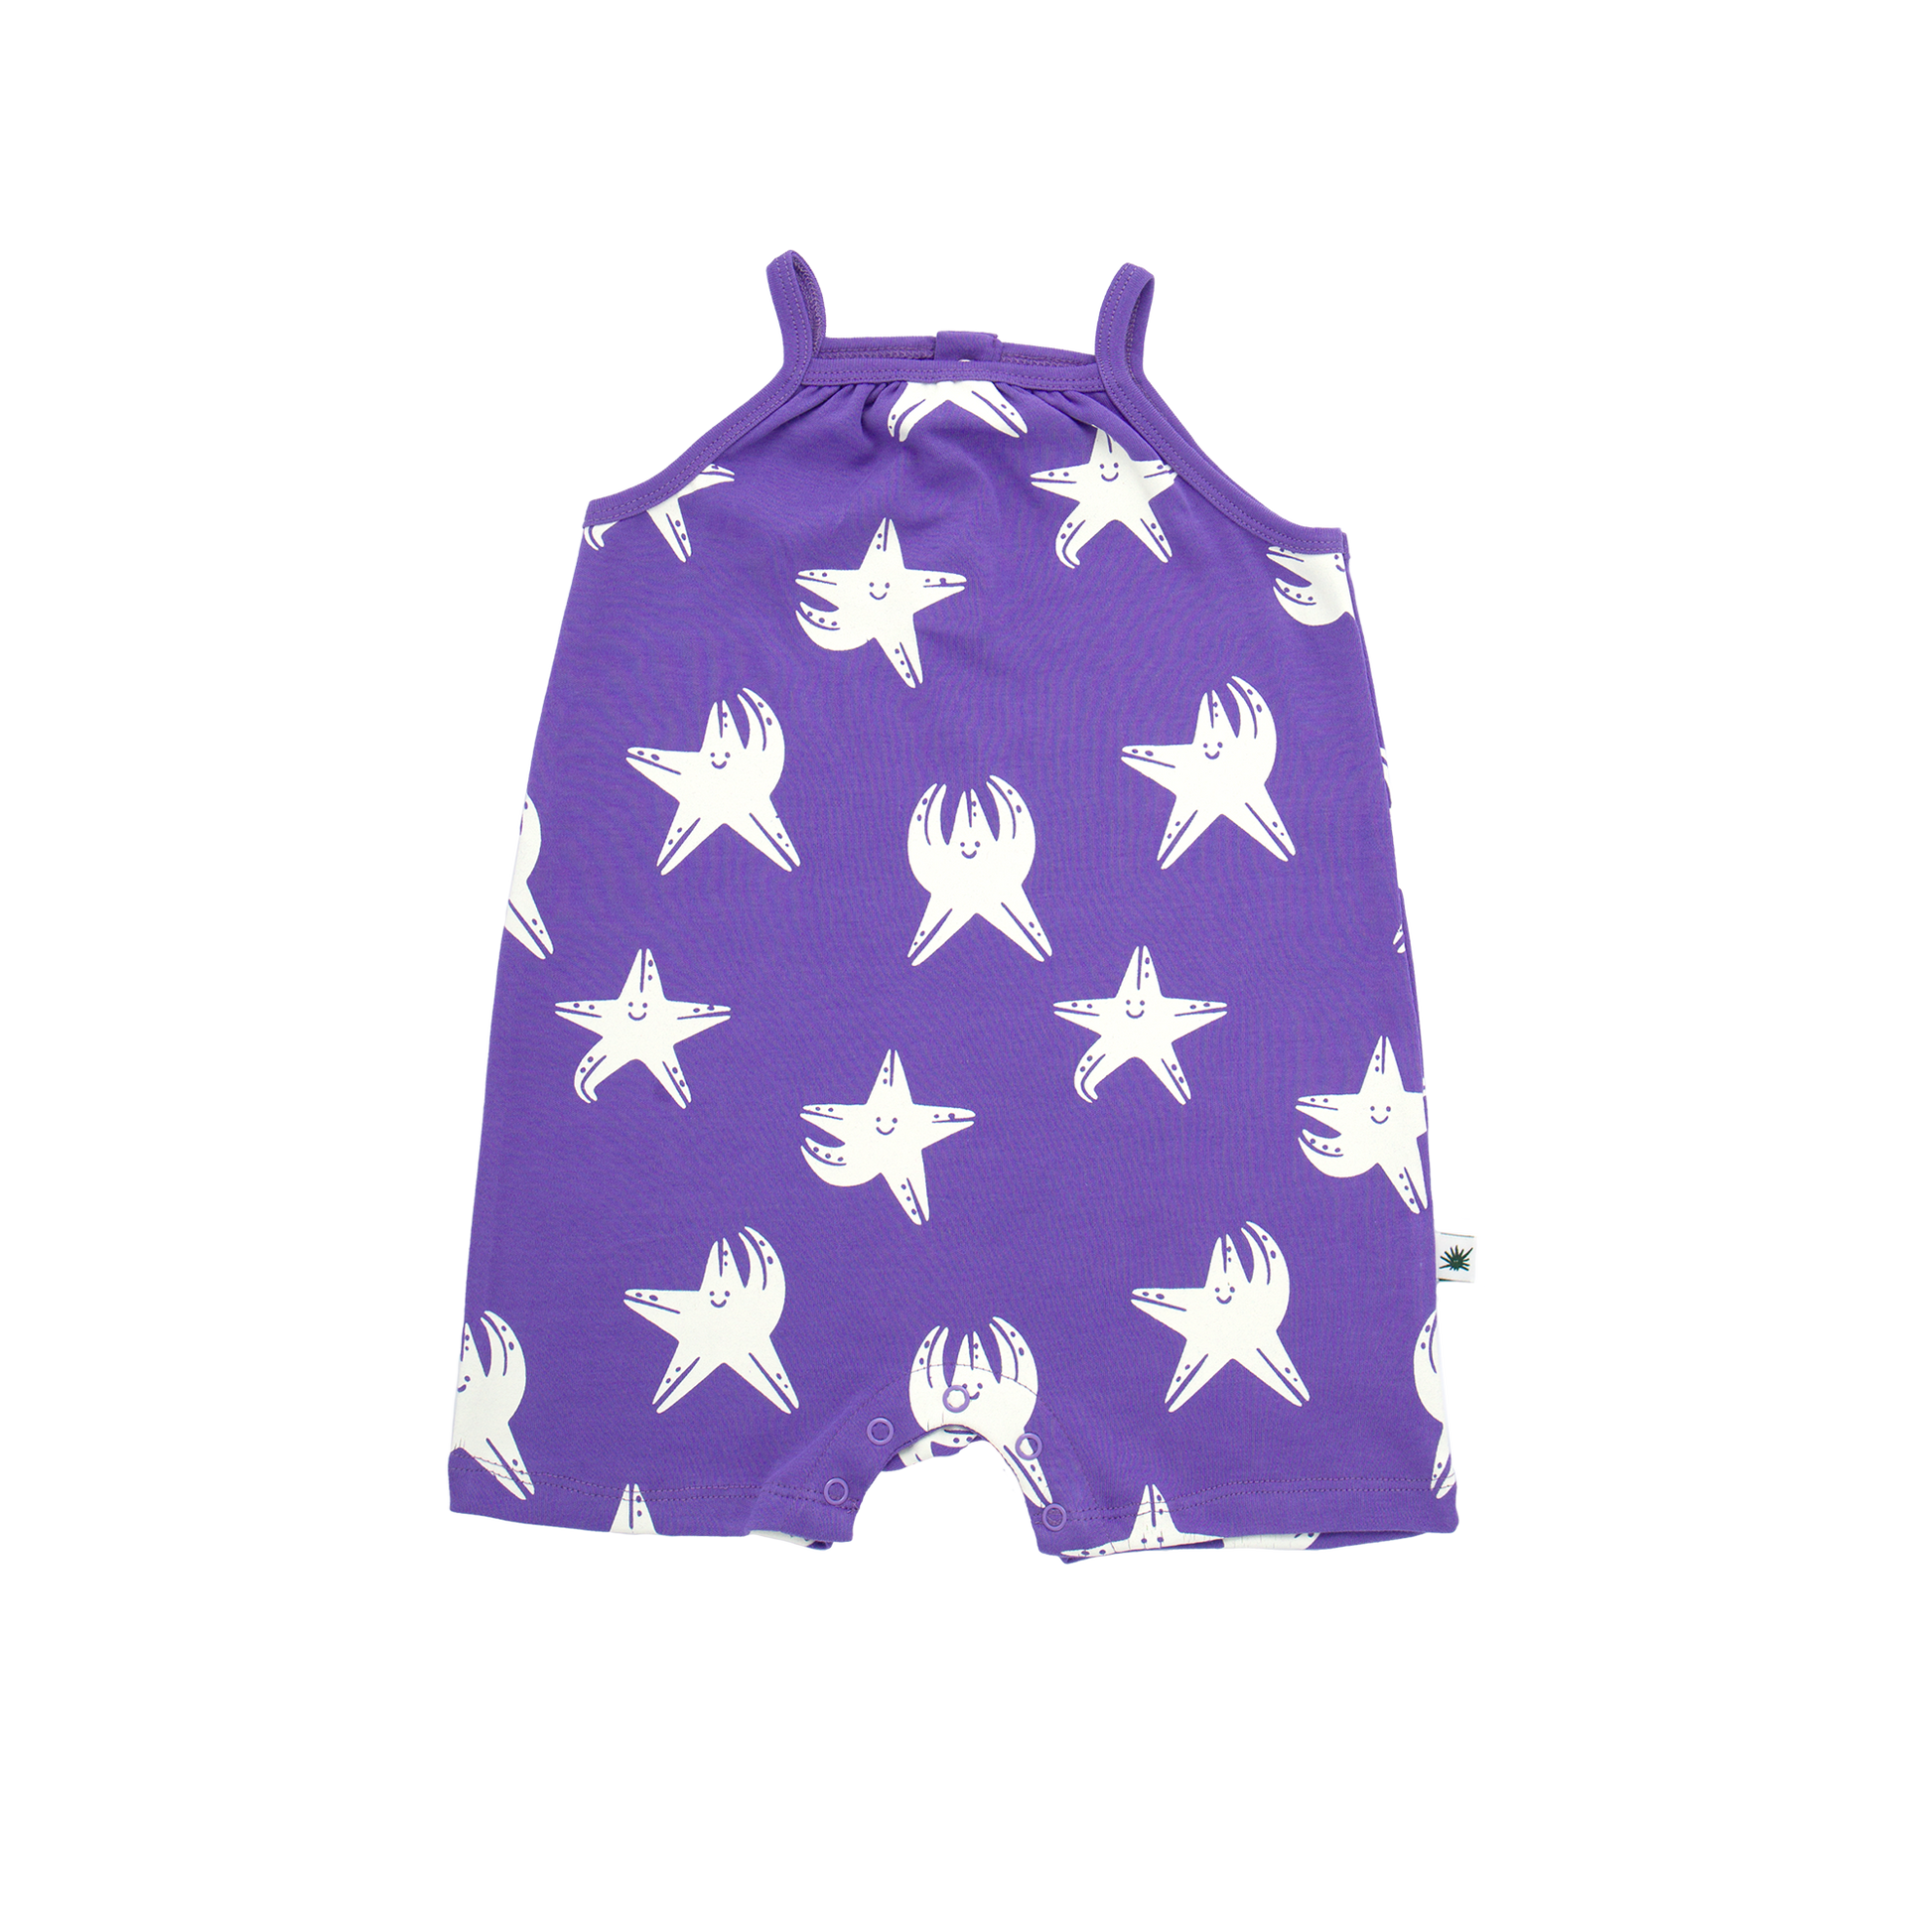 Super cute organic cotton romper for girls and boys